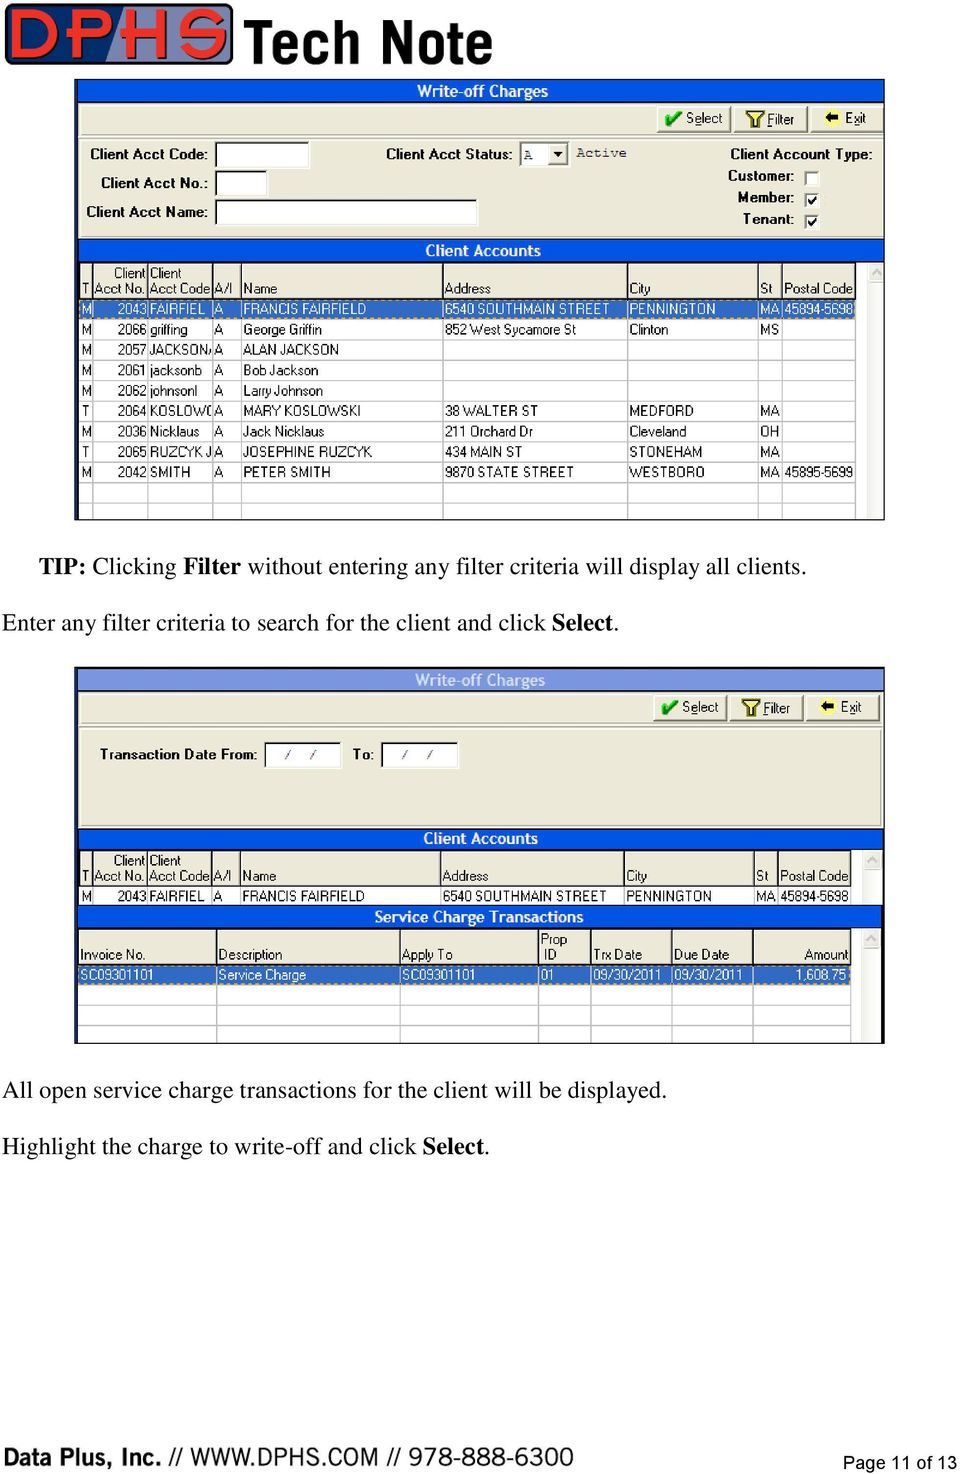 Enter any filter criteria to search for the client and click Select.